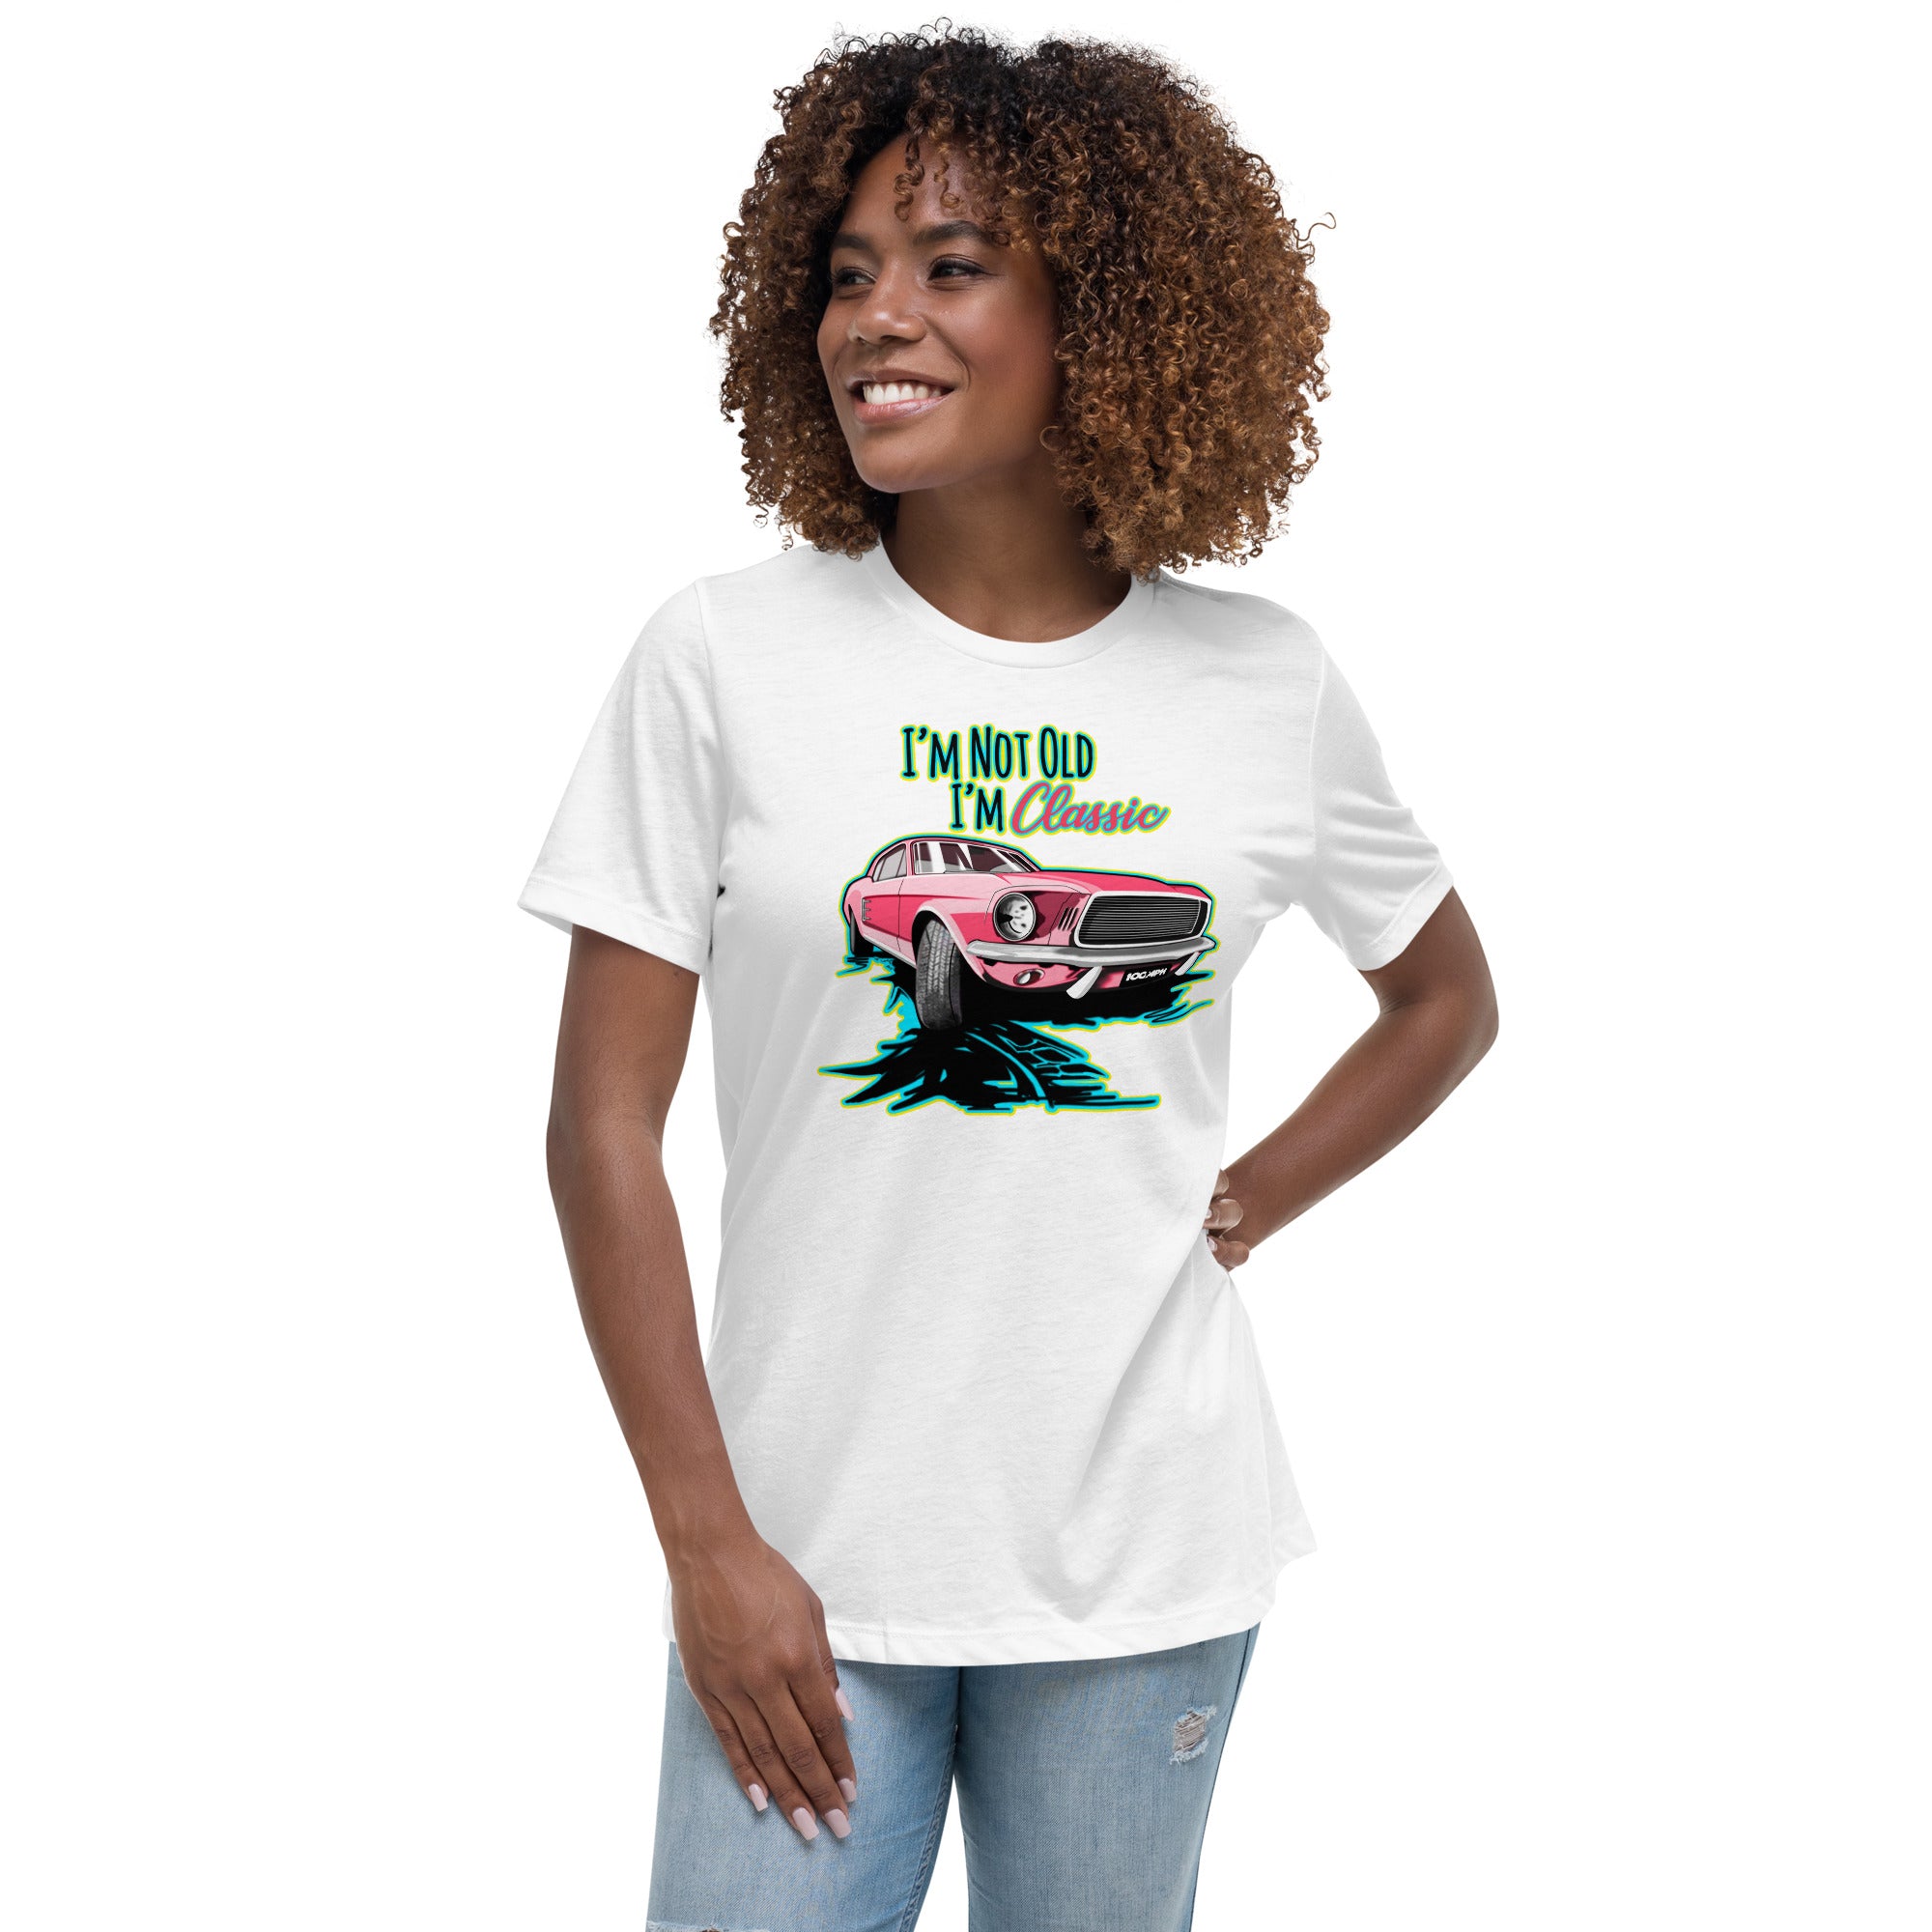 "I'm Not Old, I'm Classic" Classic Ford Mustang Tee Shirt - Women's